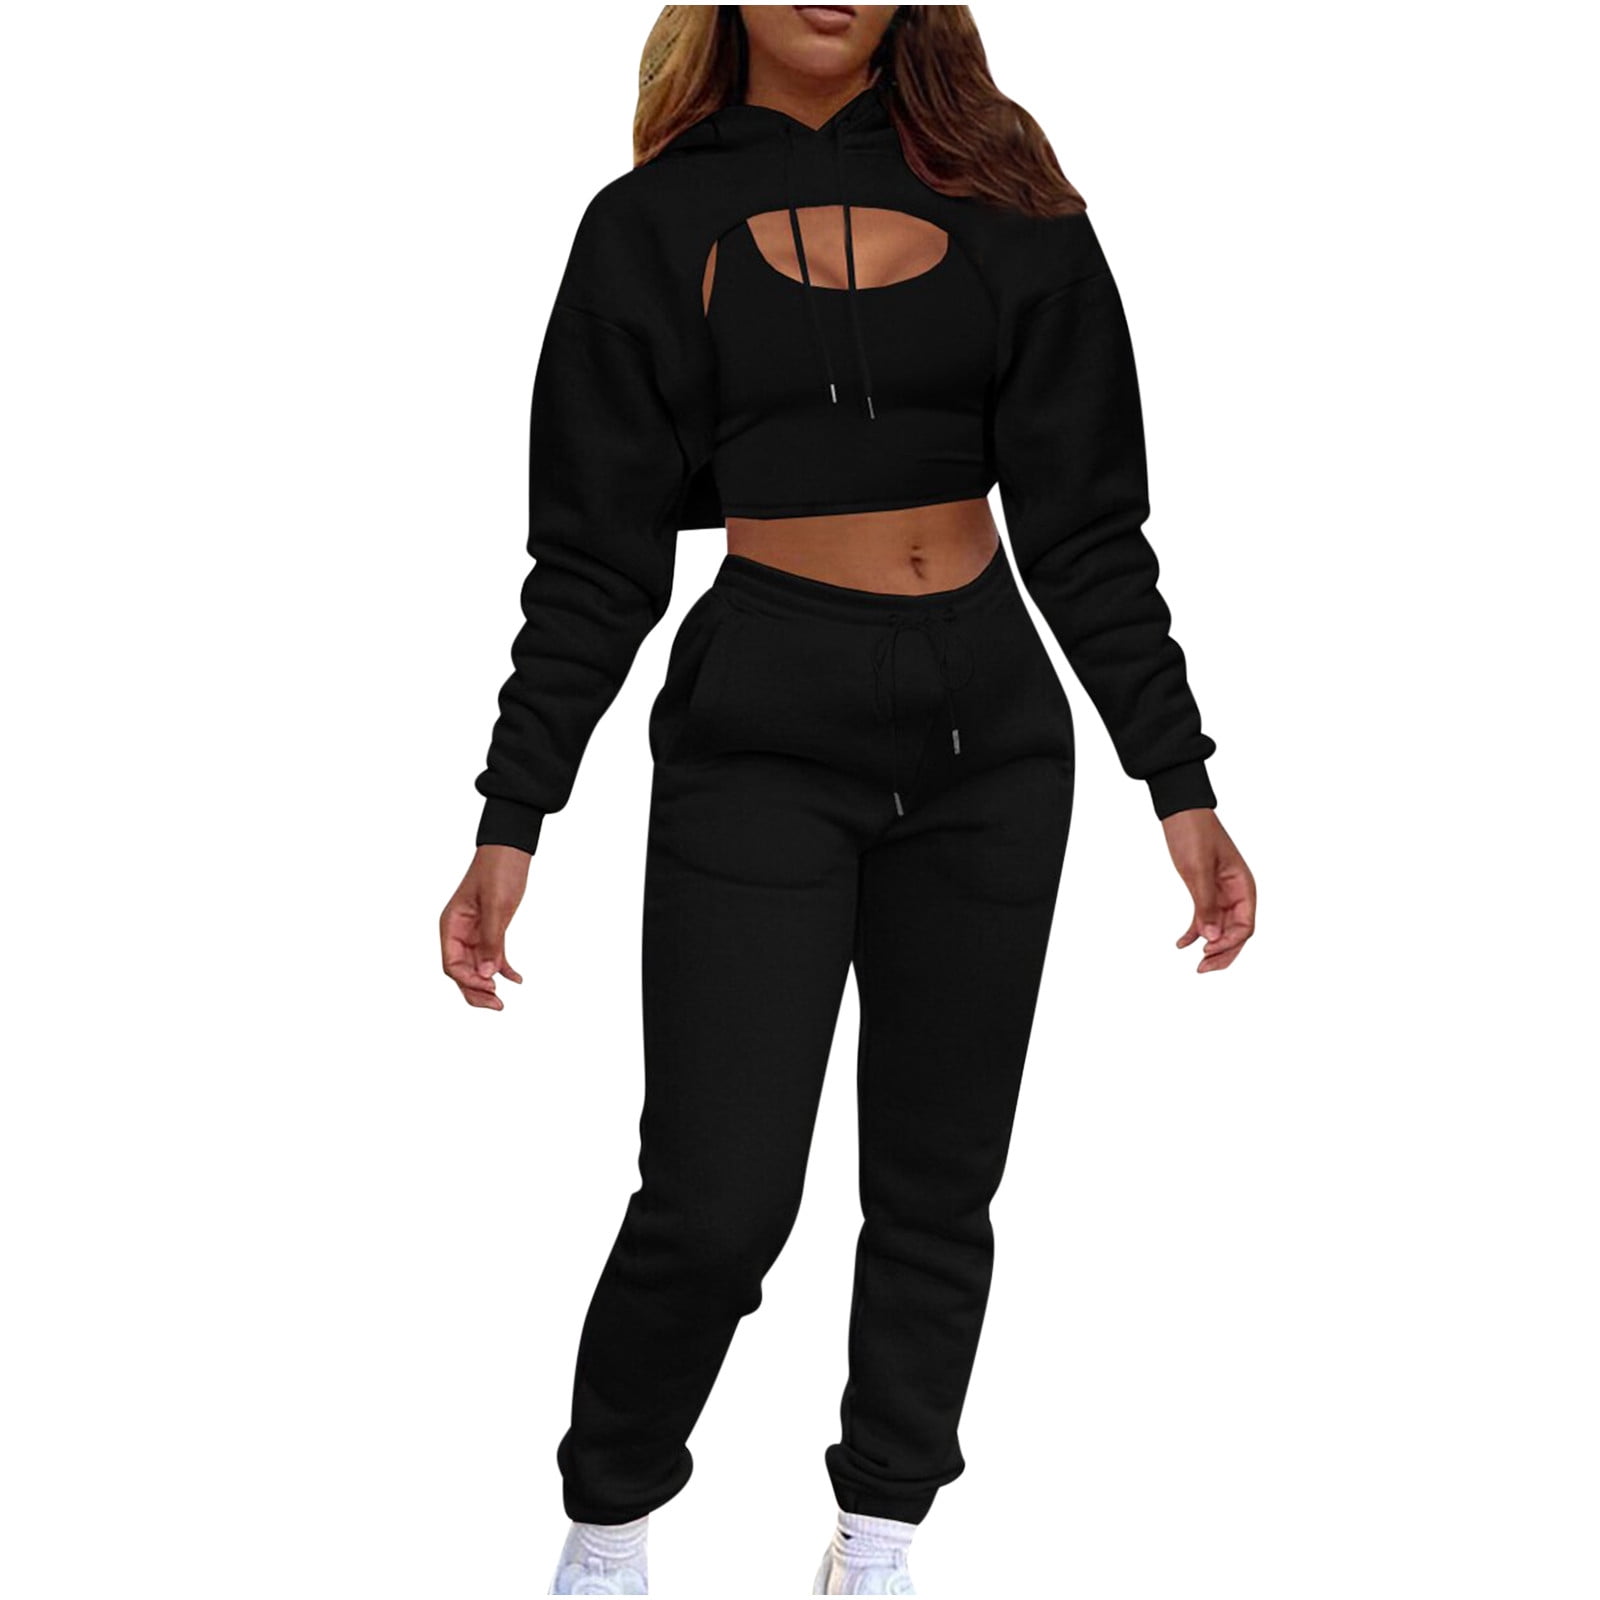 Womens Crewneck Sweatshirt with Yoga Leggings Two Piece Outfit Sets for  Women Cute Sweatsuits Tracksuits Lounge Sets 